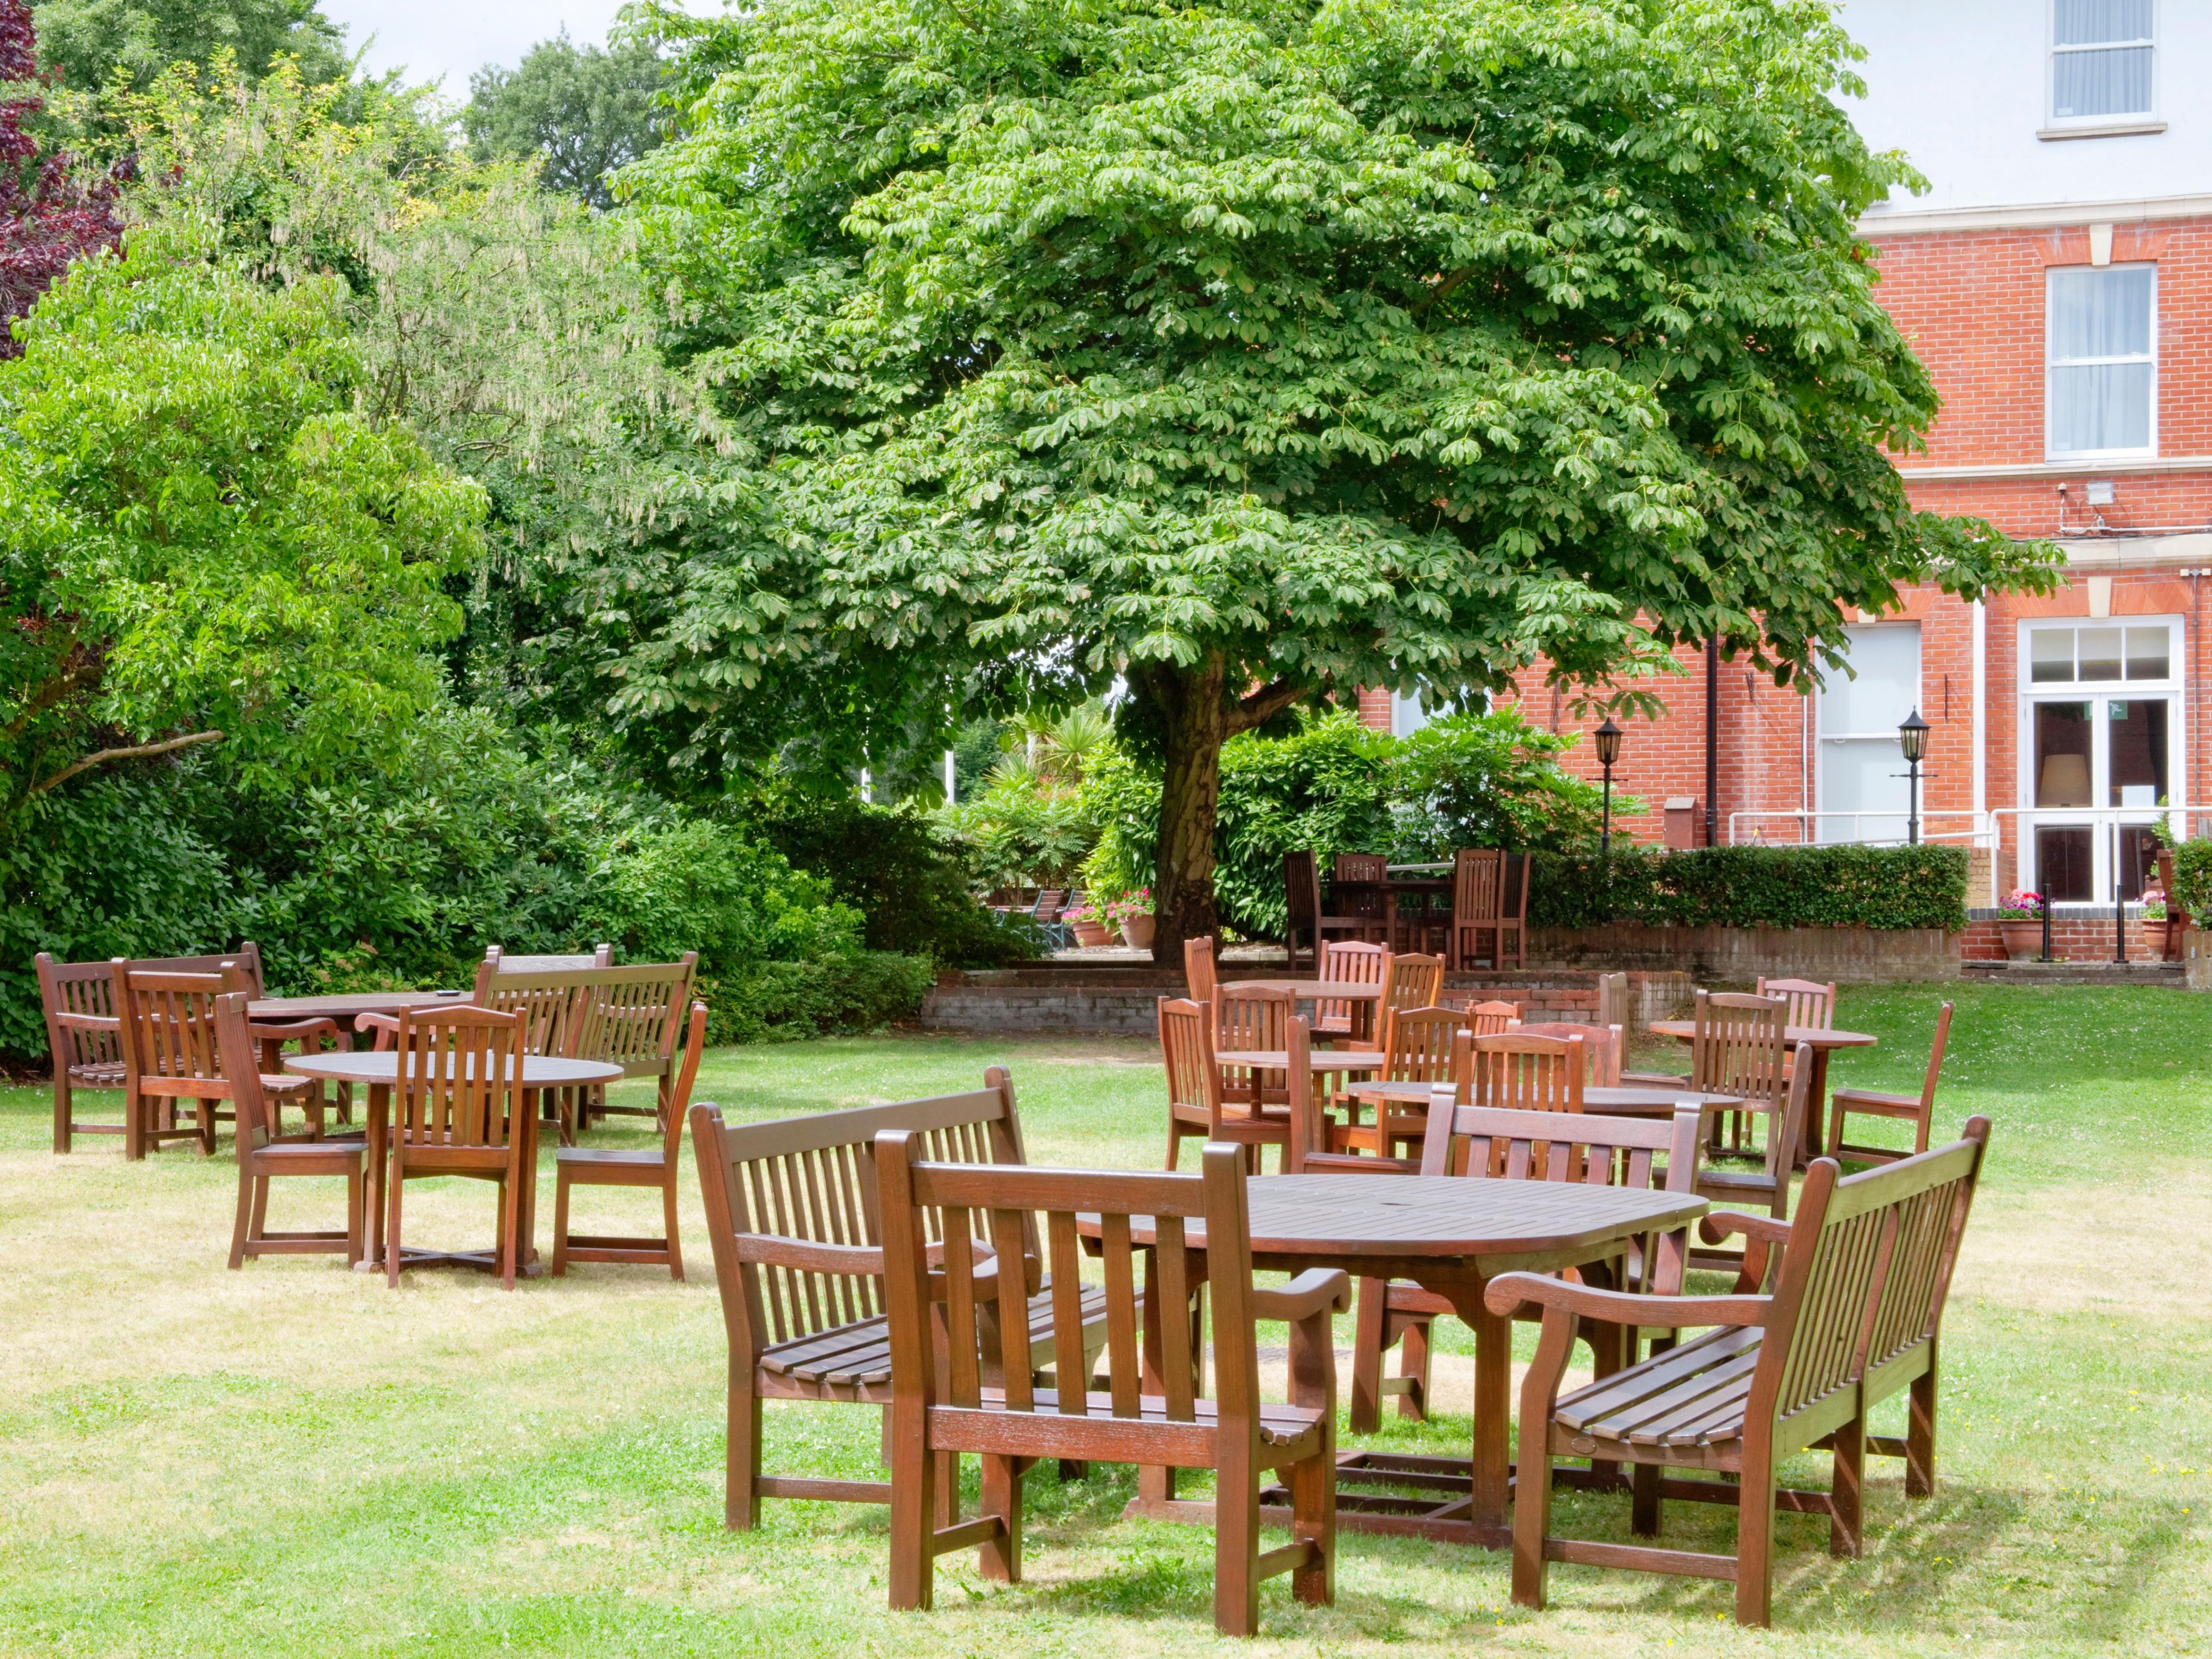 We offer the perfect outdoor space where you can enjoy dinner in the sunshine or a casual drink with friends. Our beautiful garden is available for private barbeque dinners and drink receptions during the summer months.